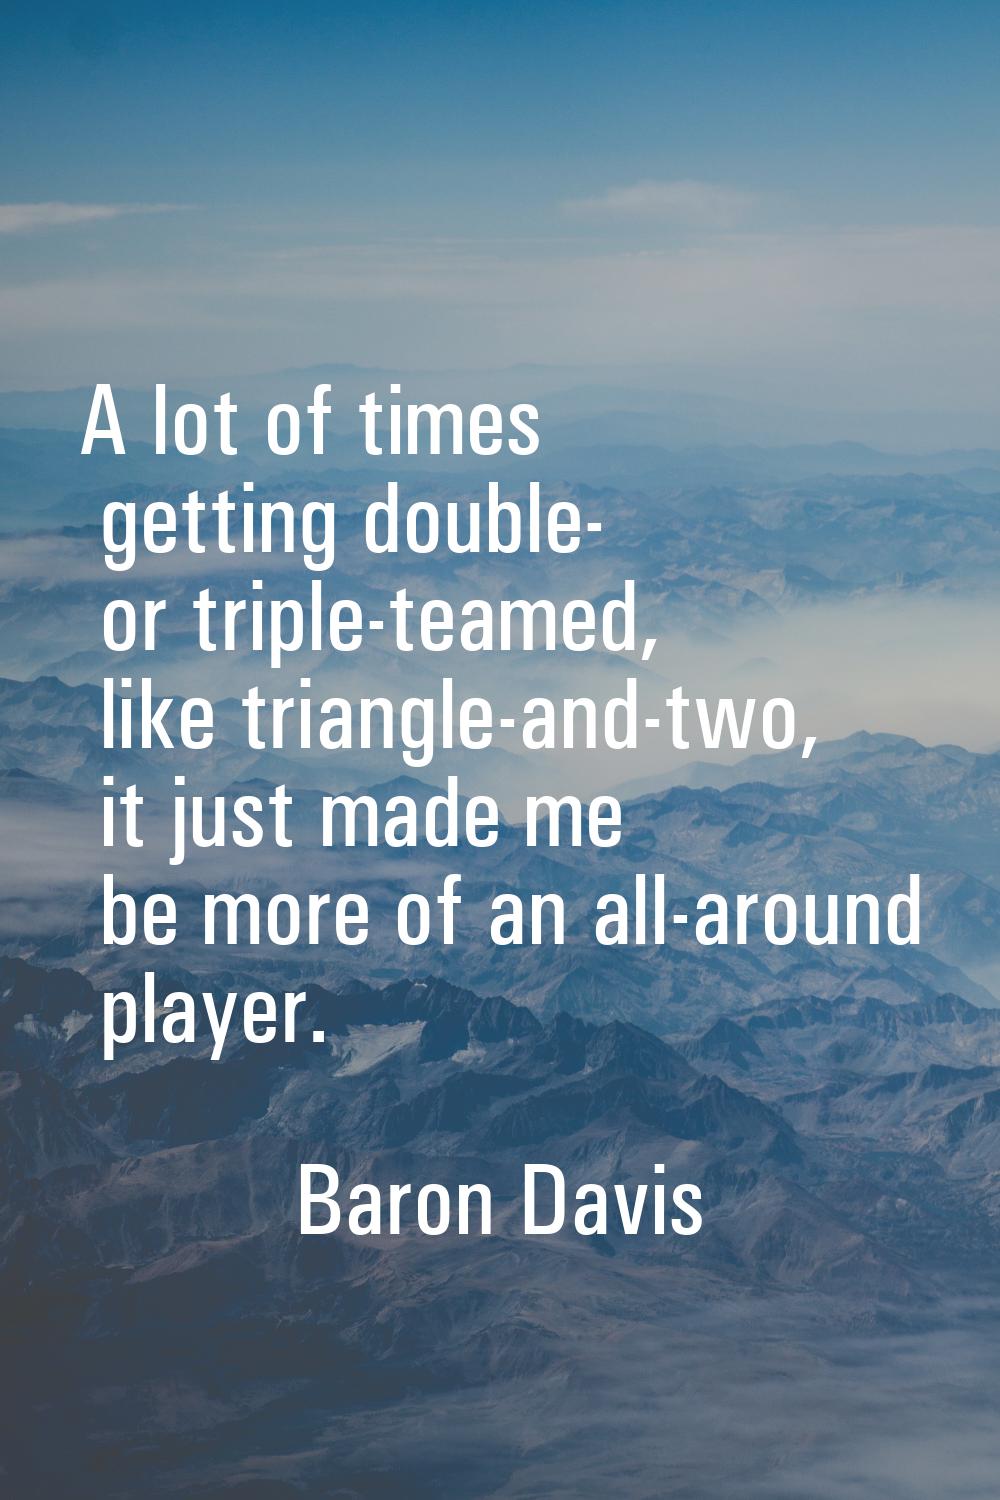 A lot of times getting double- or triple-teamed, like triangle-and-two, it just made me be more of 